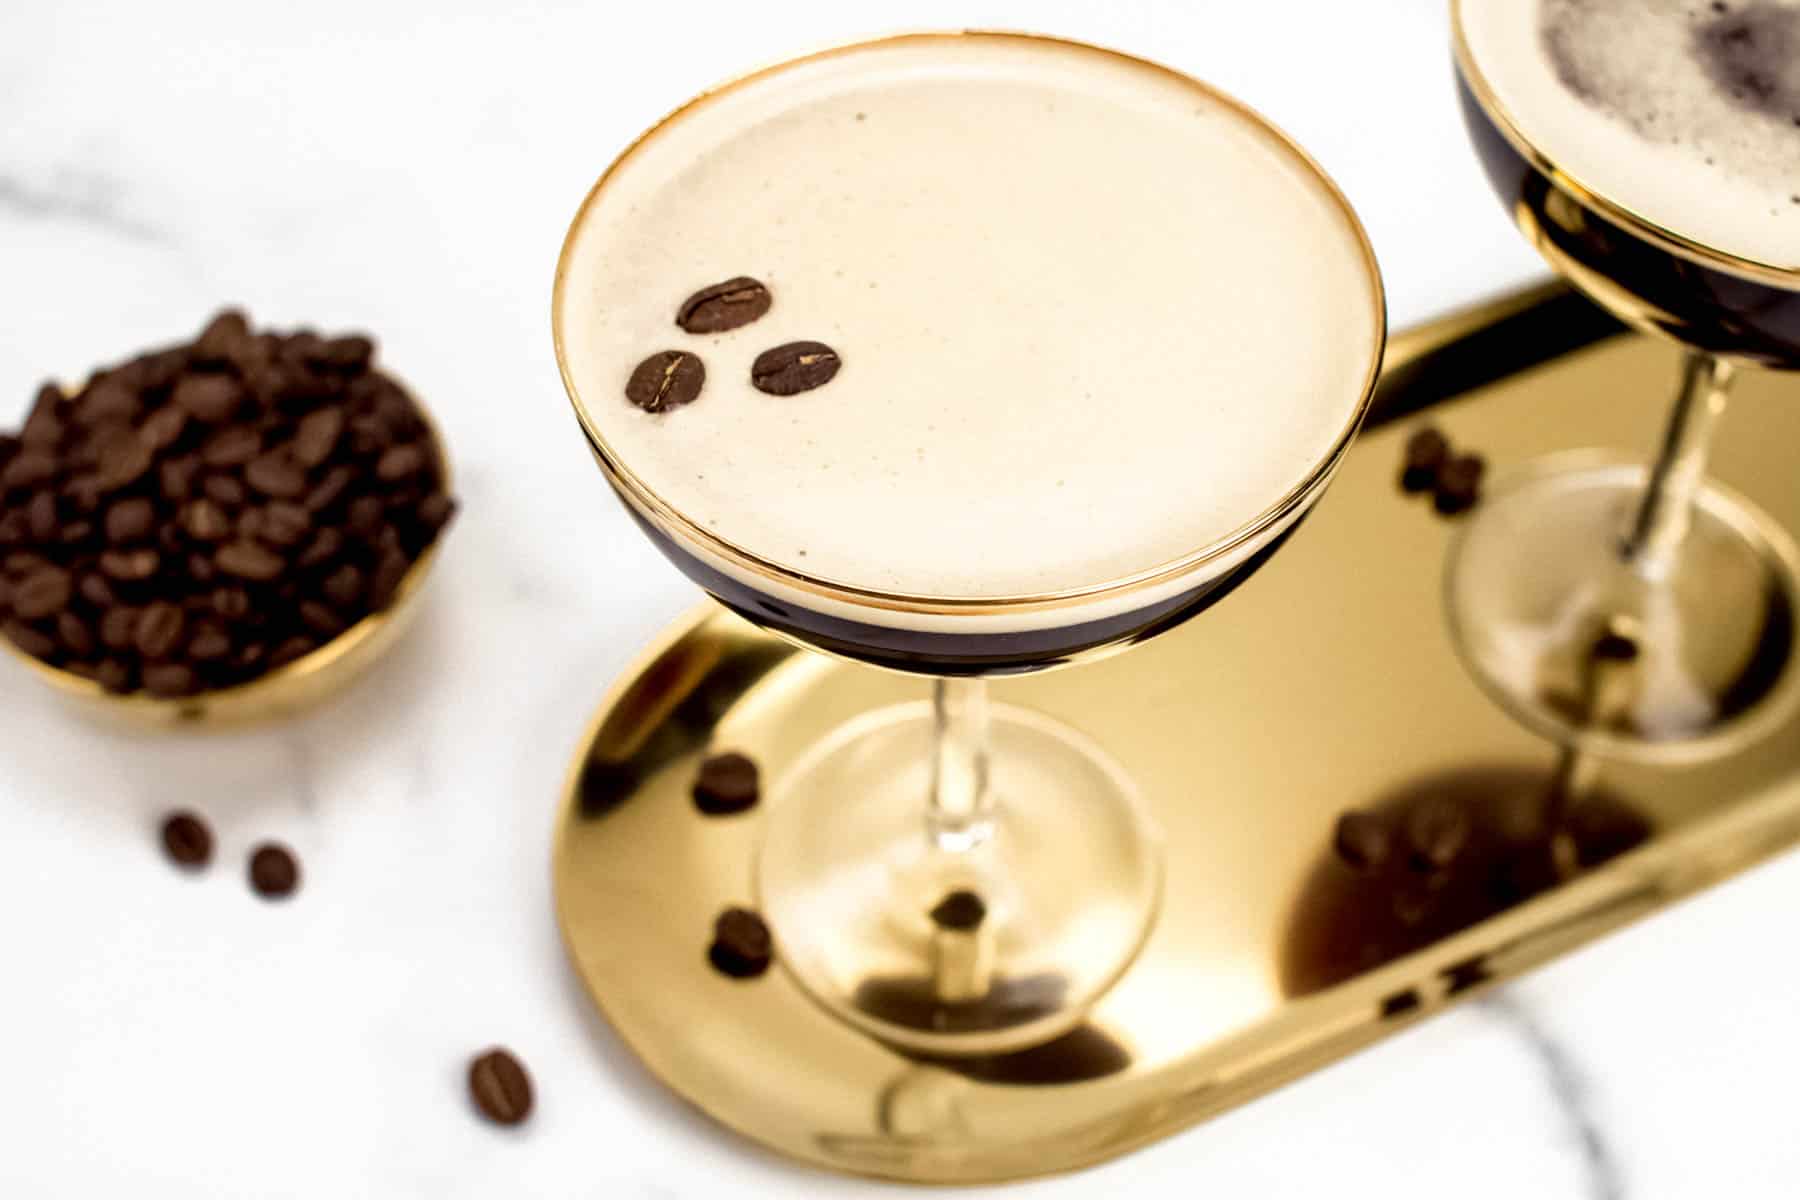 espresso martinis in coupe glasses on a gold tray.